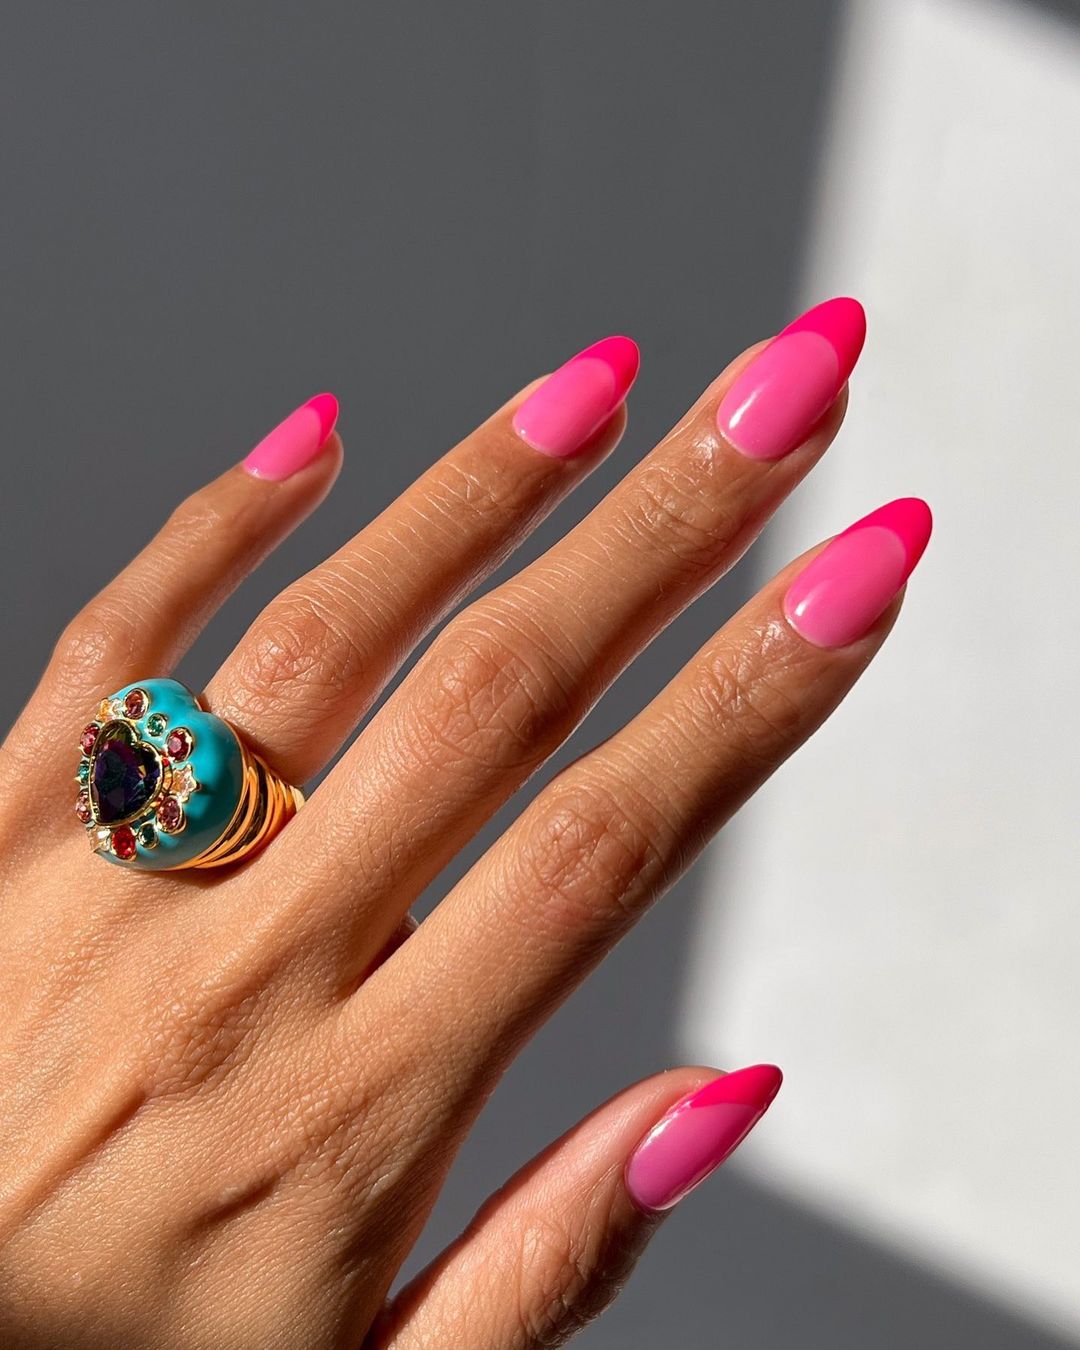 30 Fabulous Barbie Nails To Keep Up With The Barbiecore Trend - 201